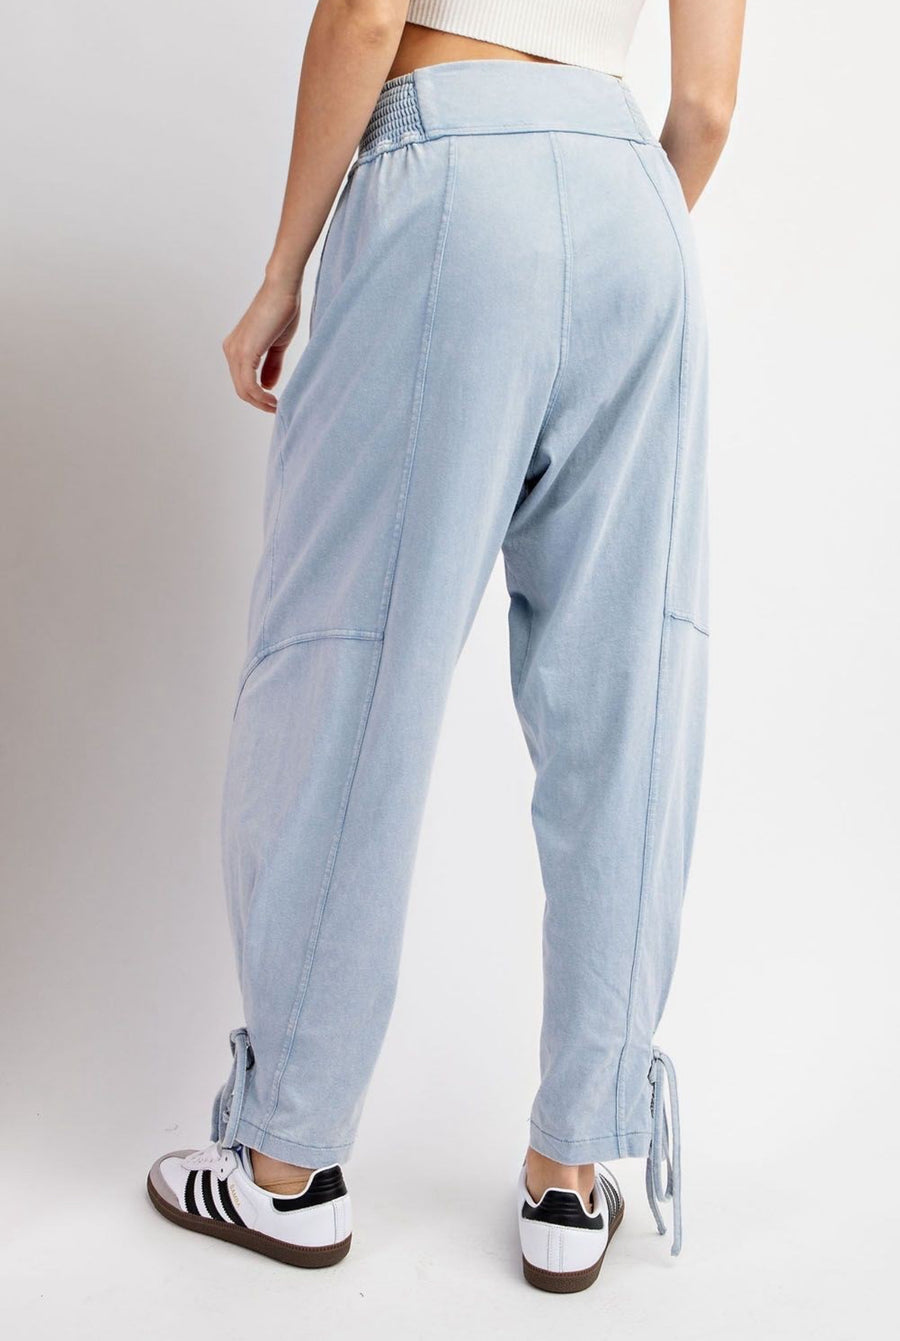 MINERAL WASHED TIE JOGGER PANTS